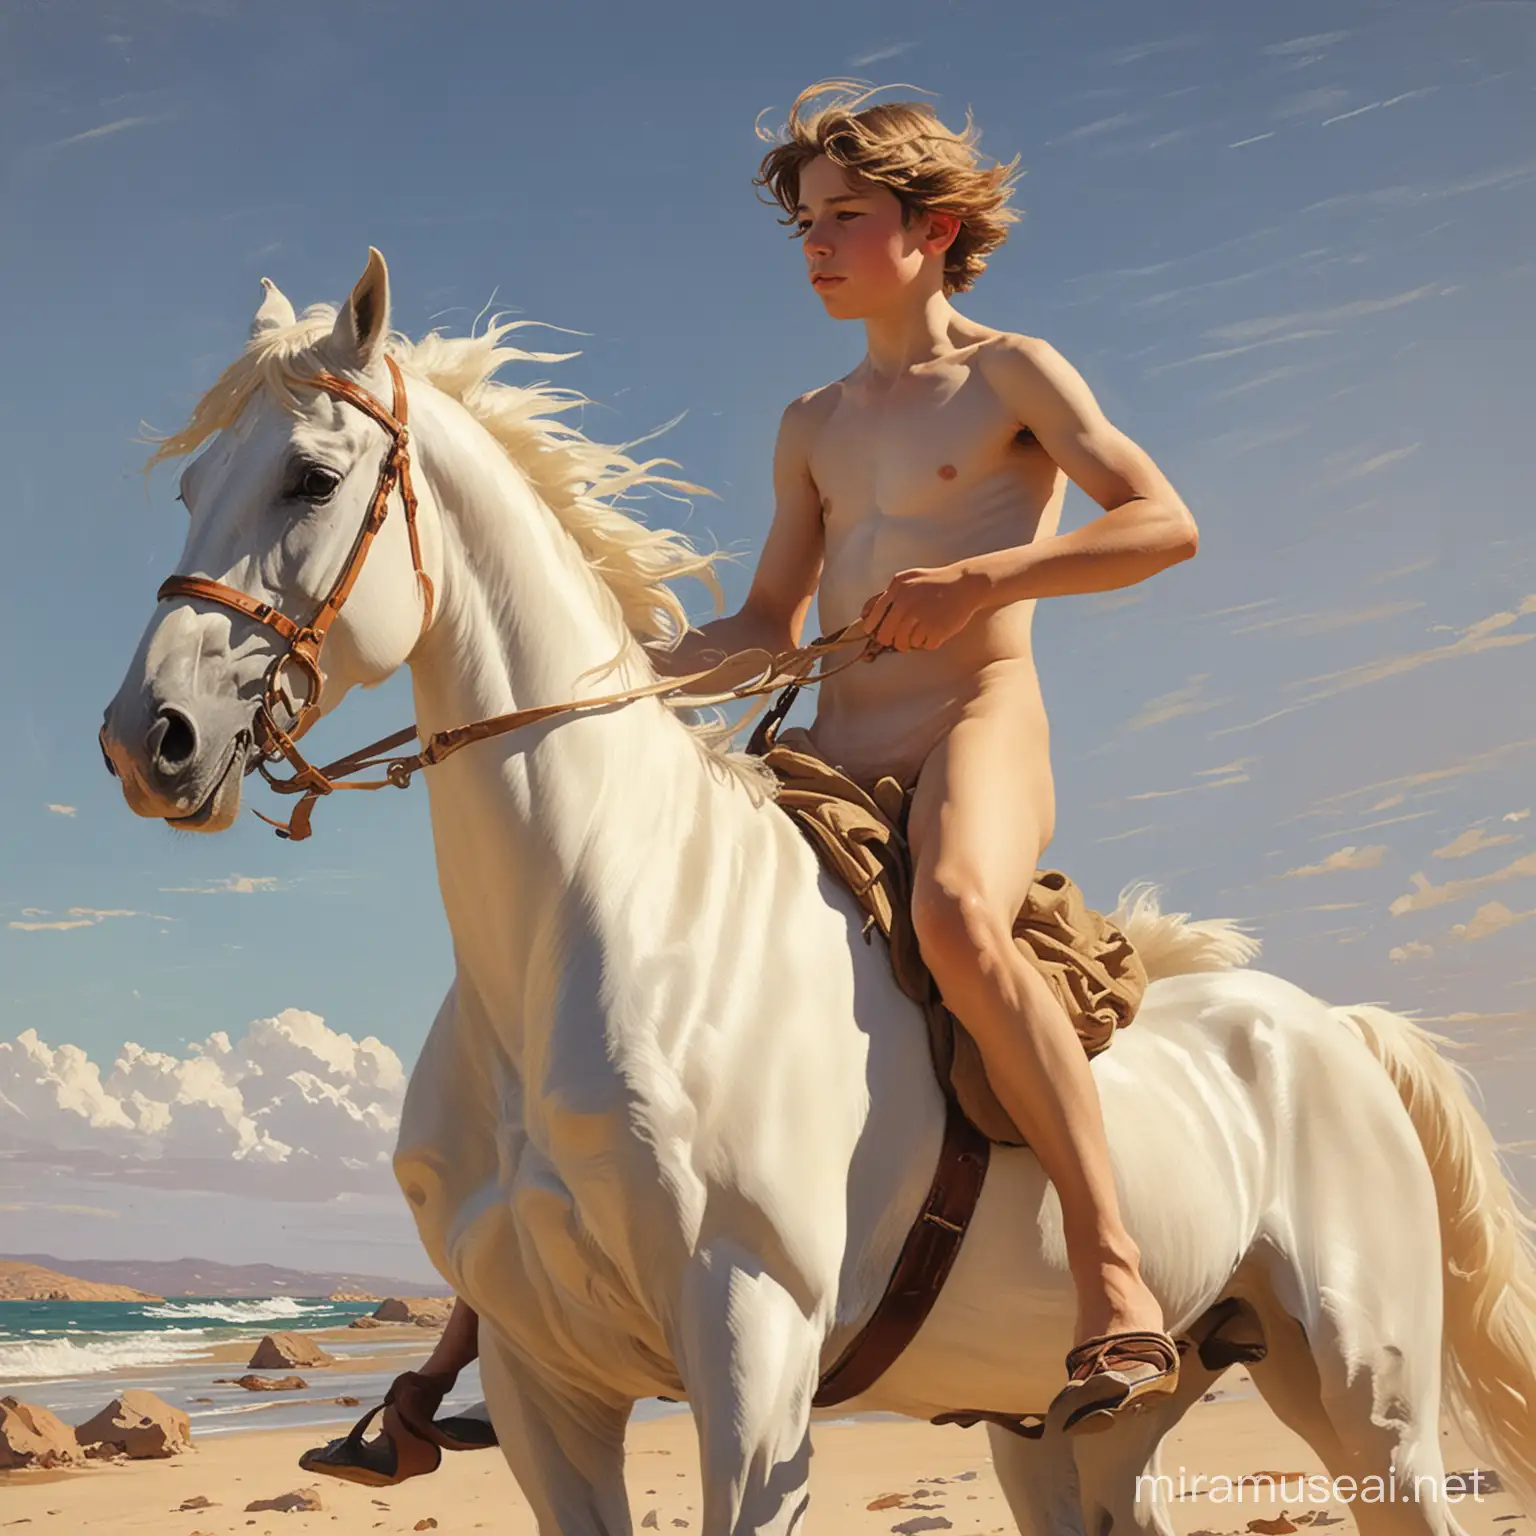 Epic SorollaStyle Painting Young Nude Boy on White Horse Amidst Natures Backlit Glory